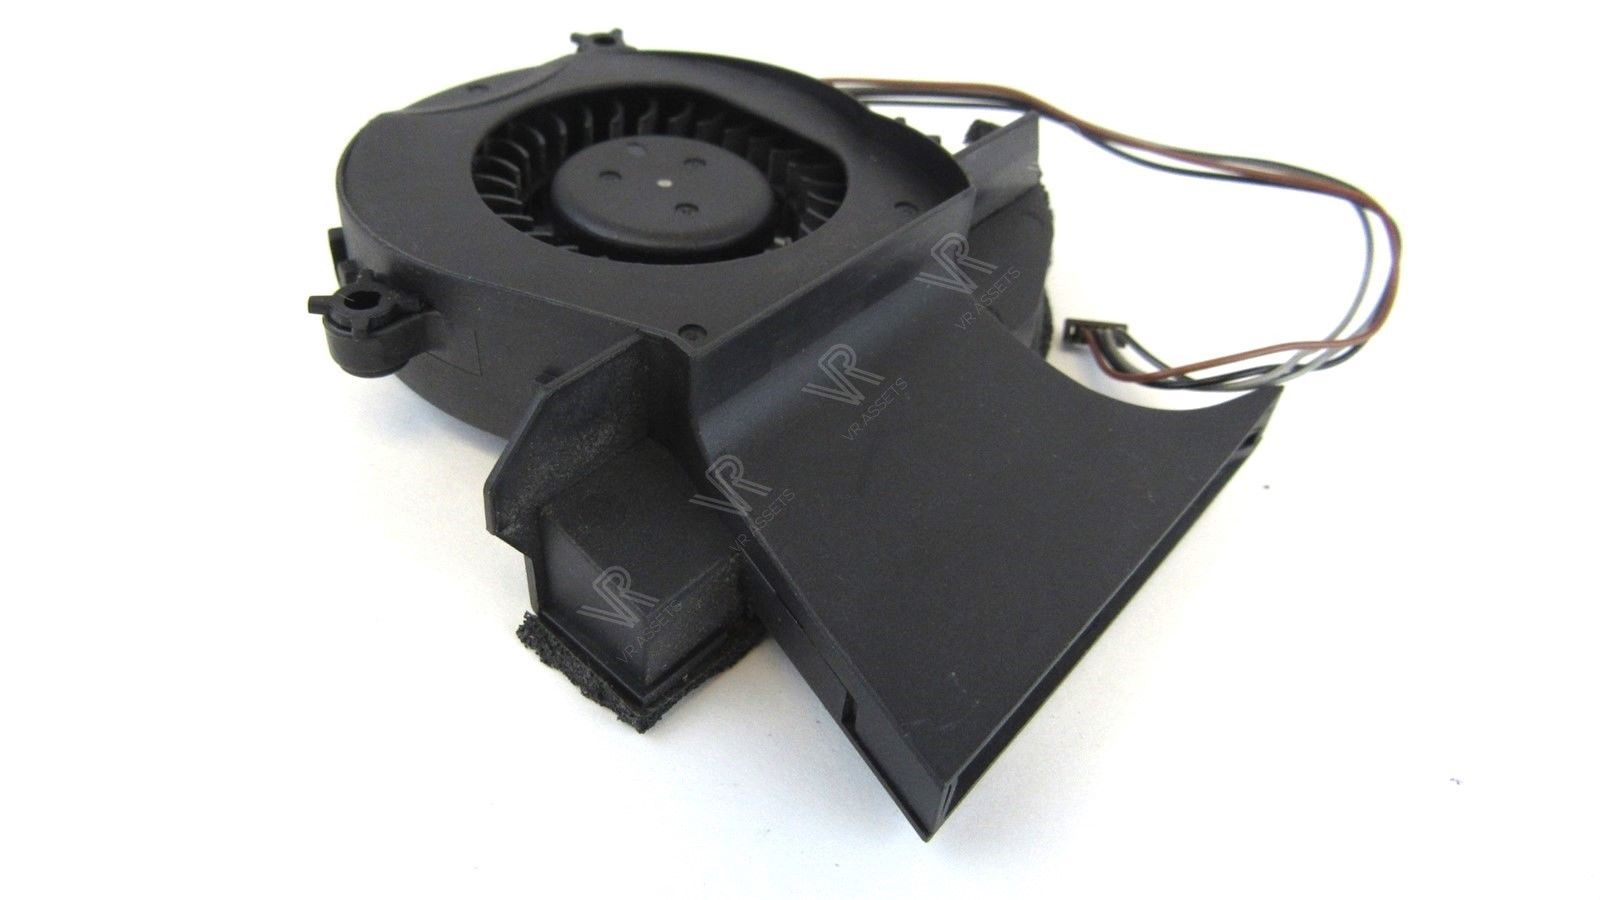 Apple iMac A1195 A1208 Delta BFB0612HB Hard Drive Cooling Fan 603-6903